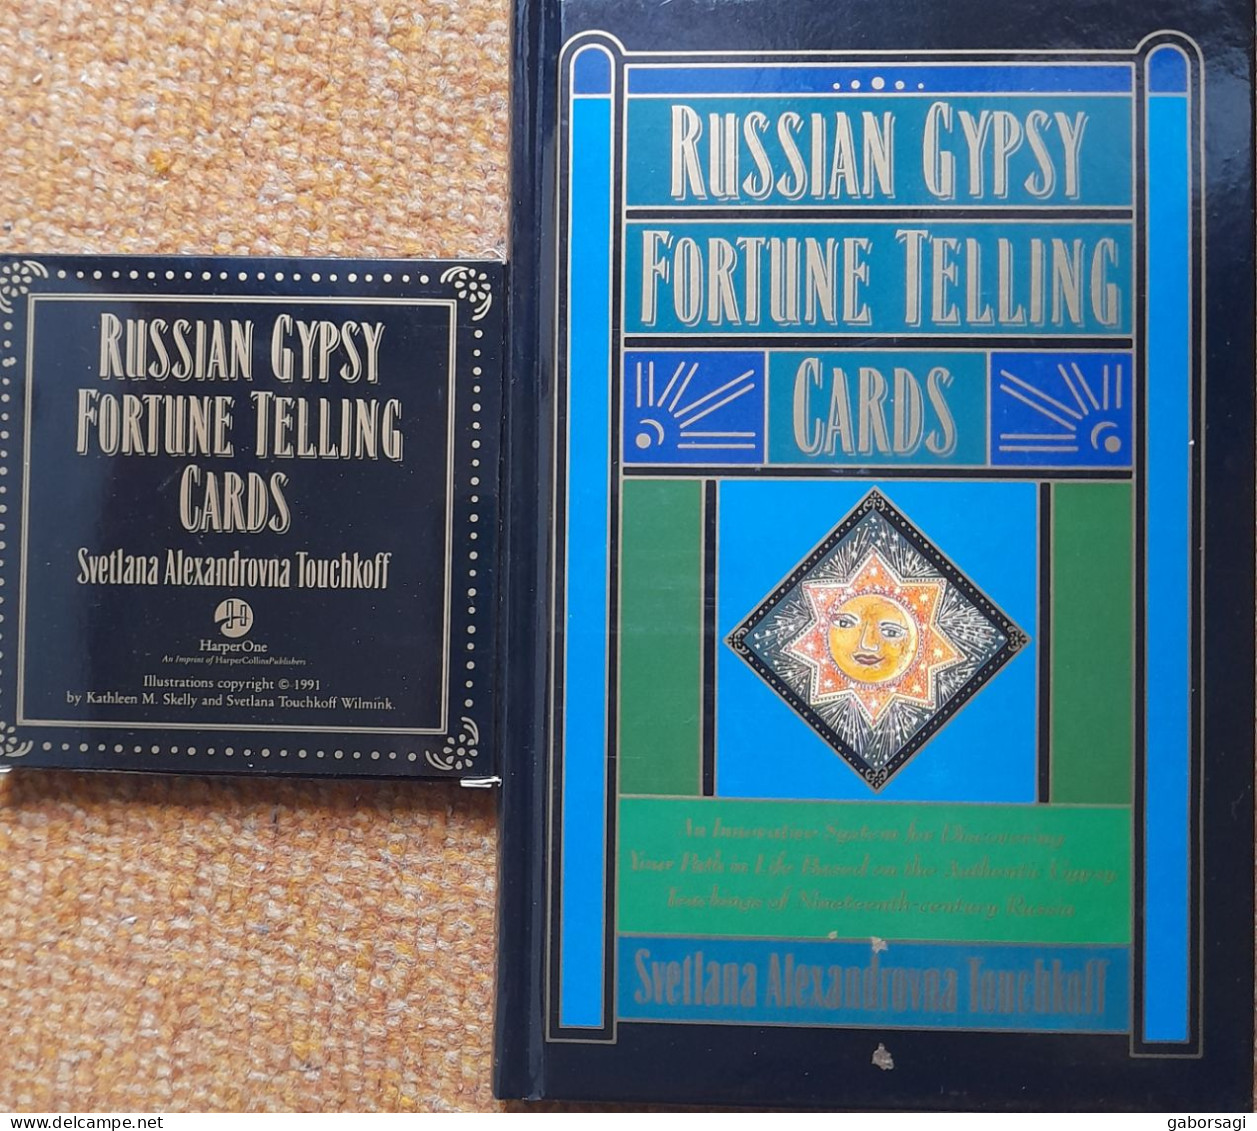 Russian Gypsy Fortune Telling Card - Svetlana Alexandrovna Touchkoff - Books On Collecting